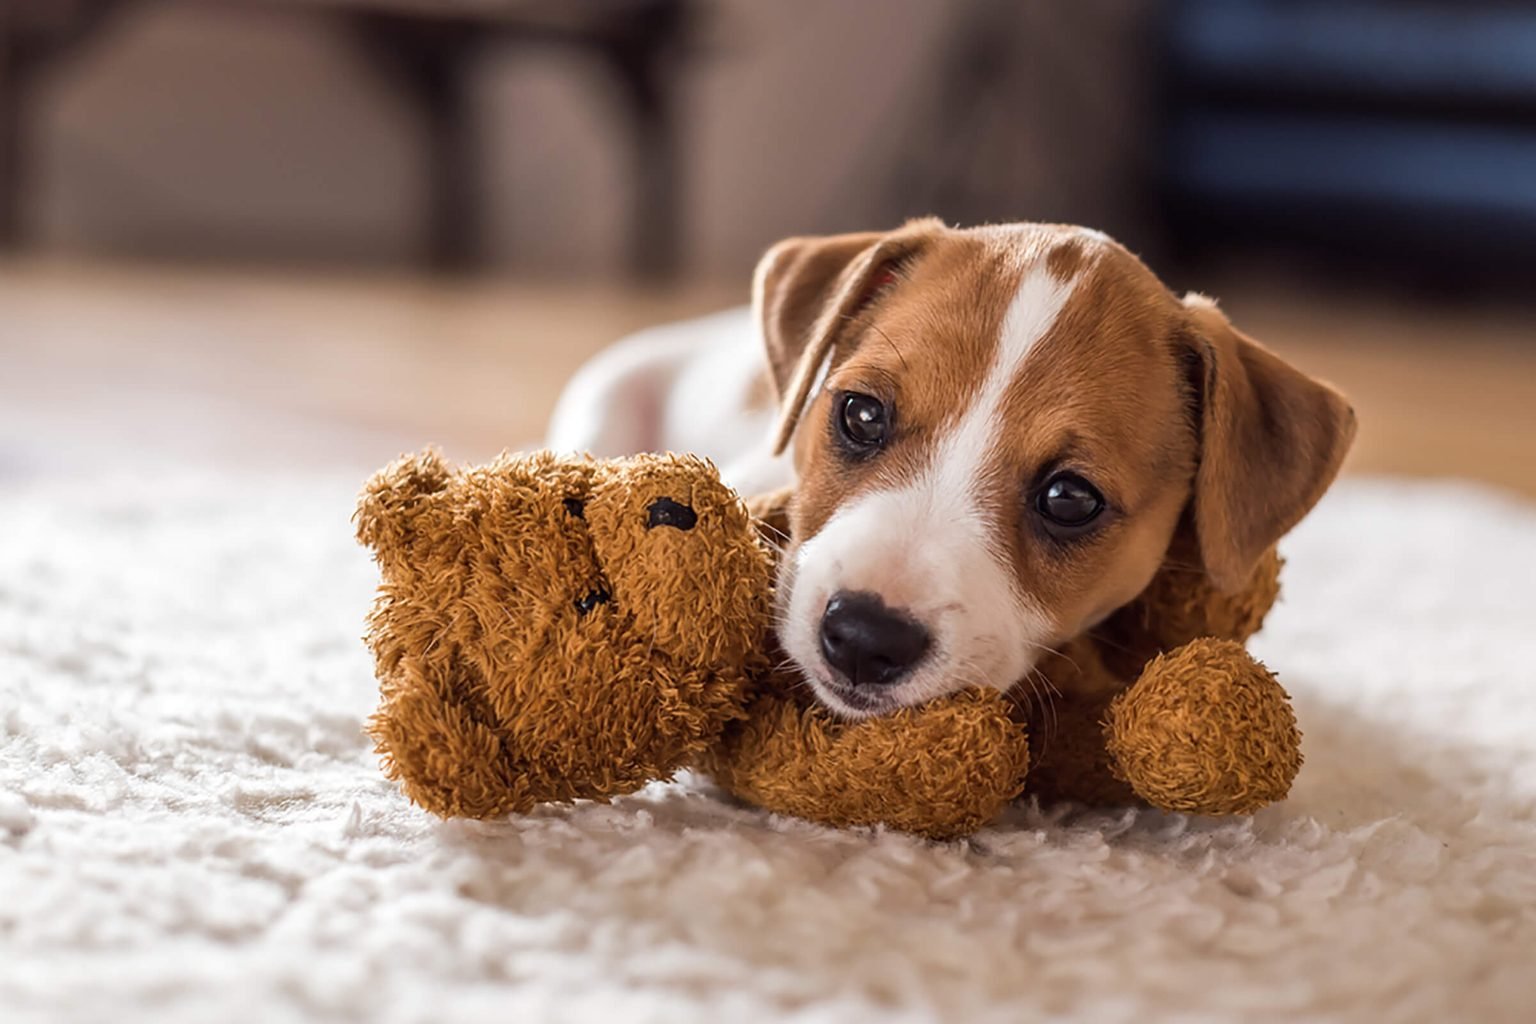 Can You Pass This General Knowledge Quiz While Being Distracted by Cute Puppies? Cute Dog Puppy 4